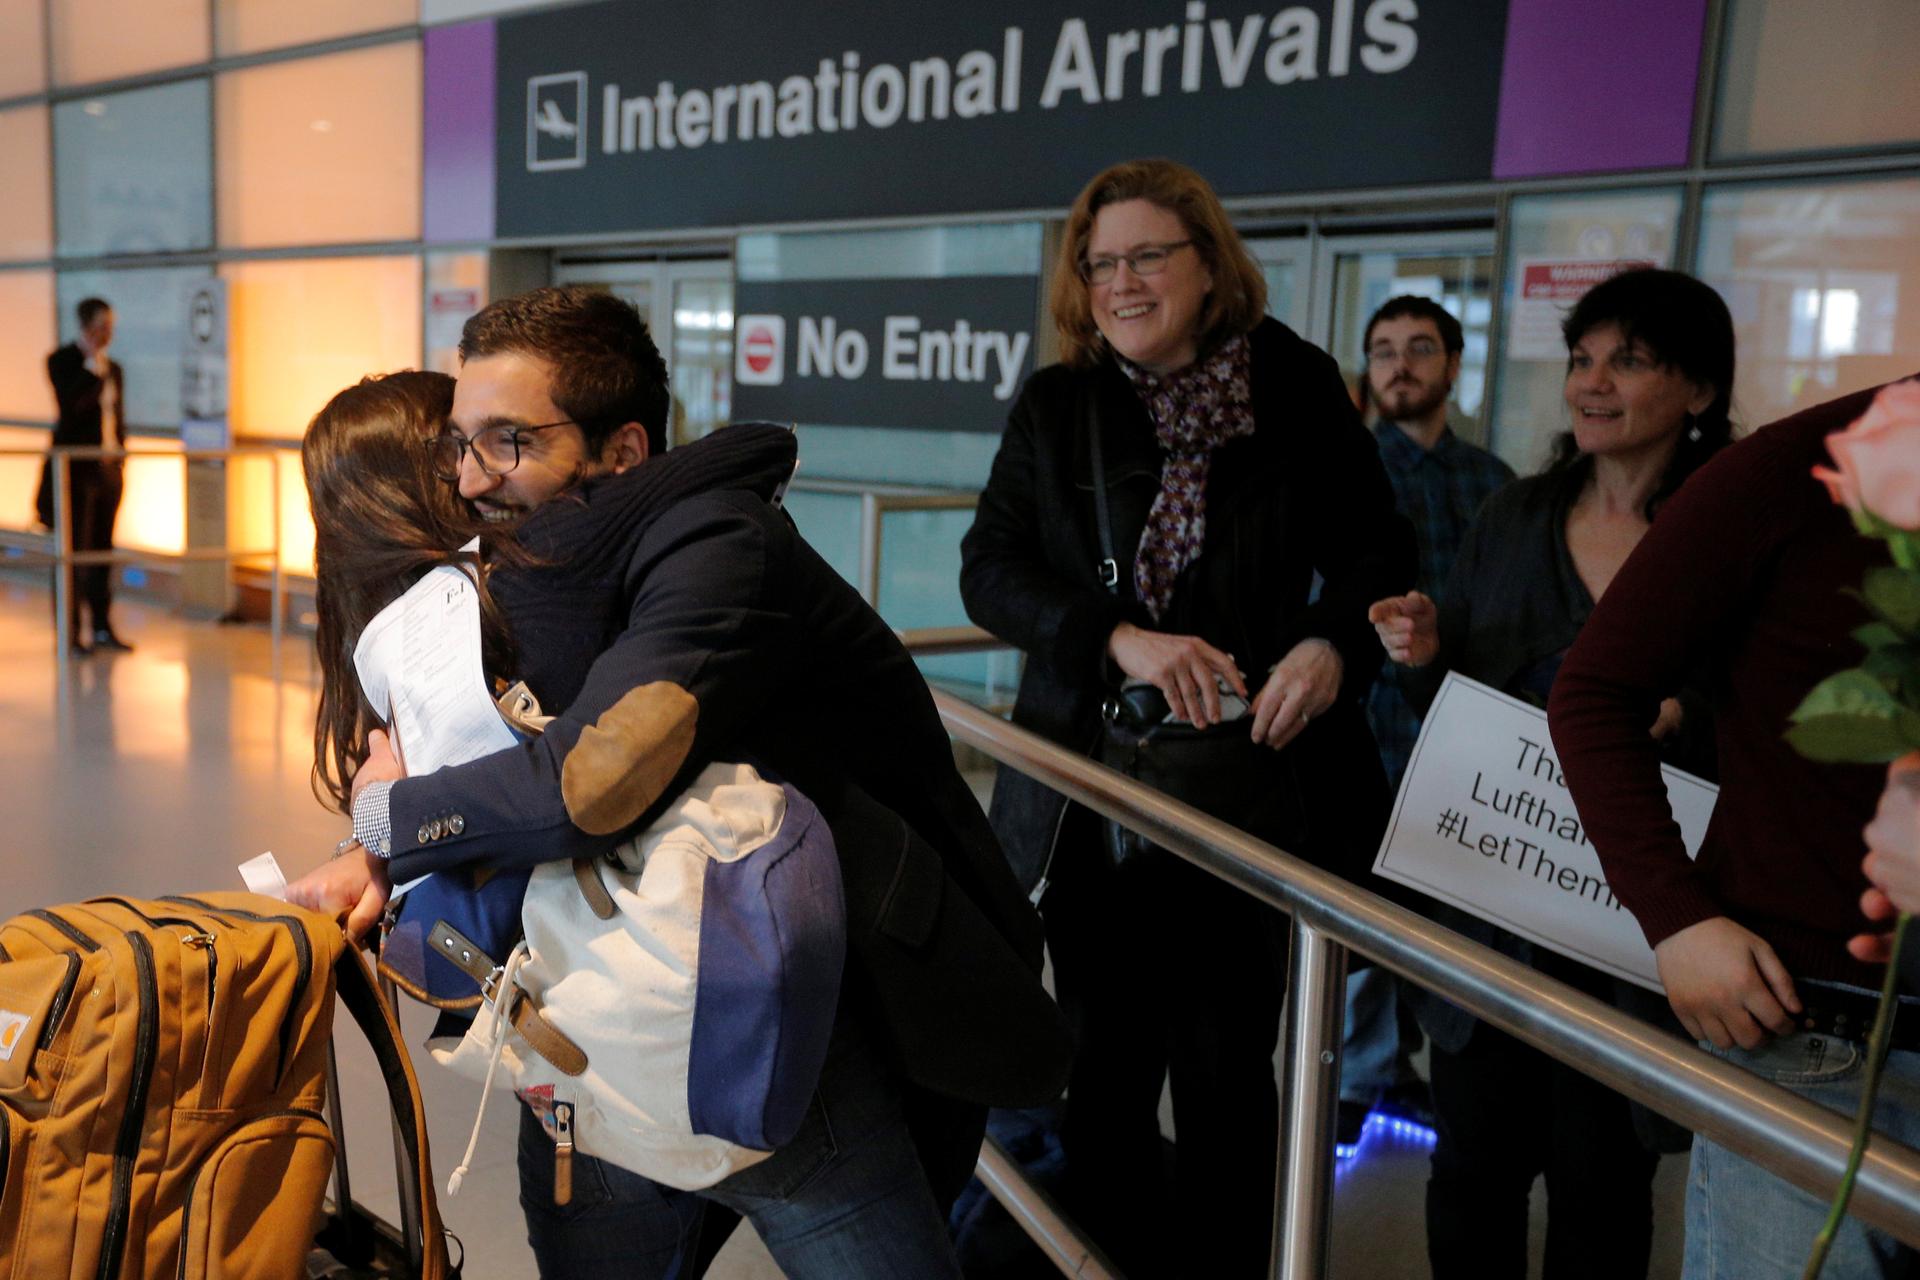 Behnam Partopour, a Worcester Polytechnic Institute (WPI) student from Iran, is greeted by his sister Bahar (L) at Logan Airport after he cleared U.S. customs and immigration on an F1 student visa in Boston, Massachusetts, U.S. February 3, 2017. Partopour